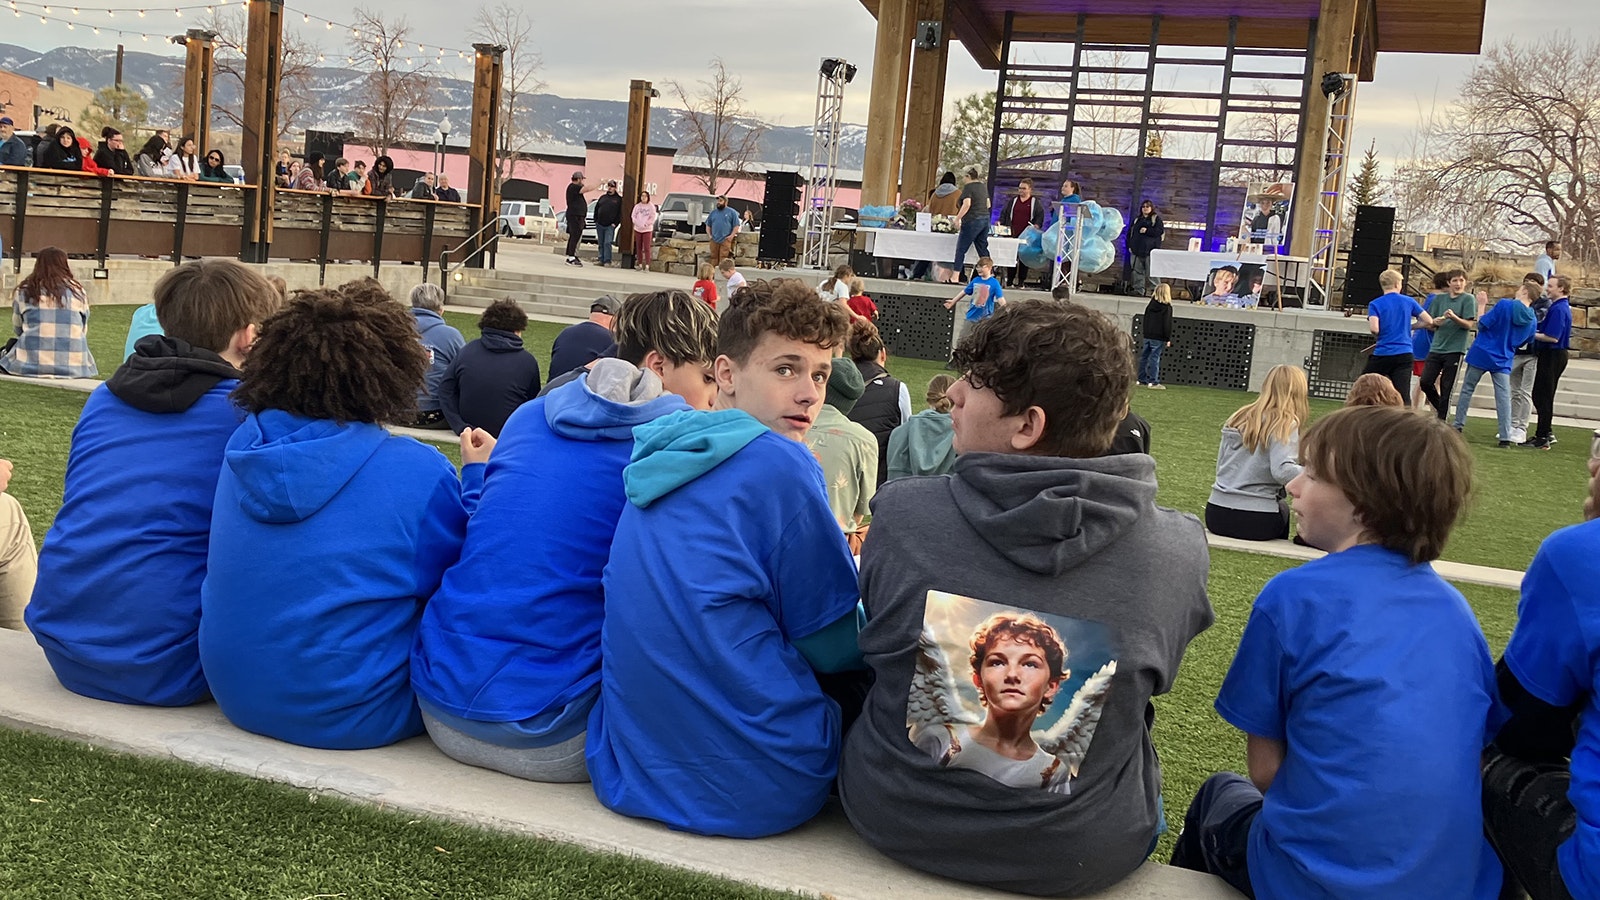 Many young people showed their support for Bobby Maher by wearing  shirts with his photo.